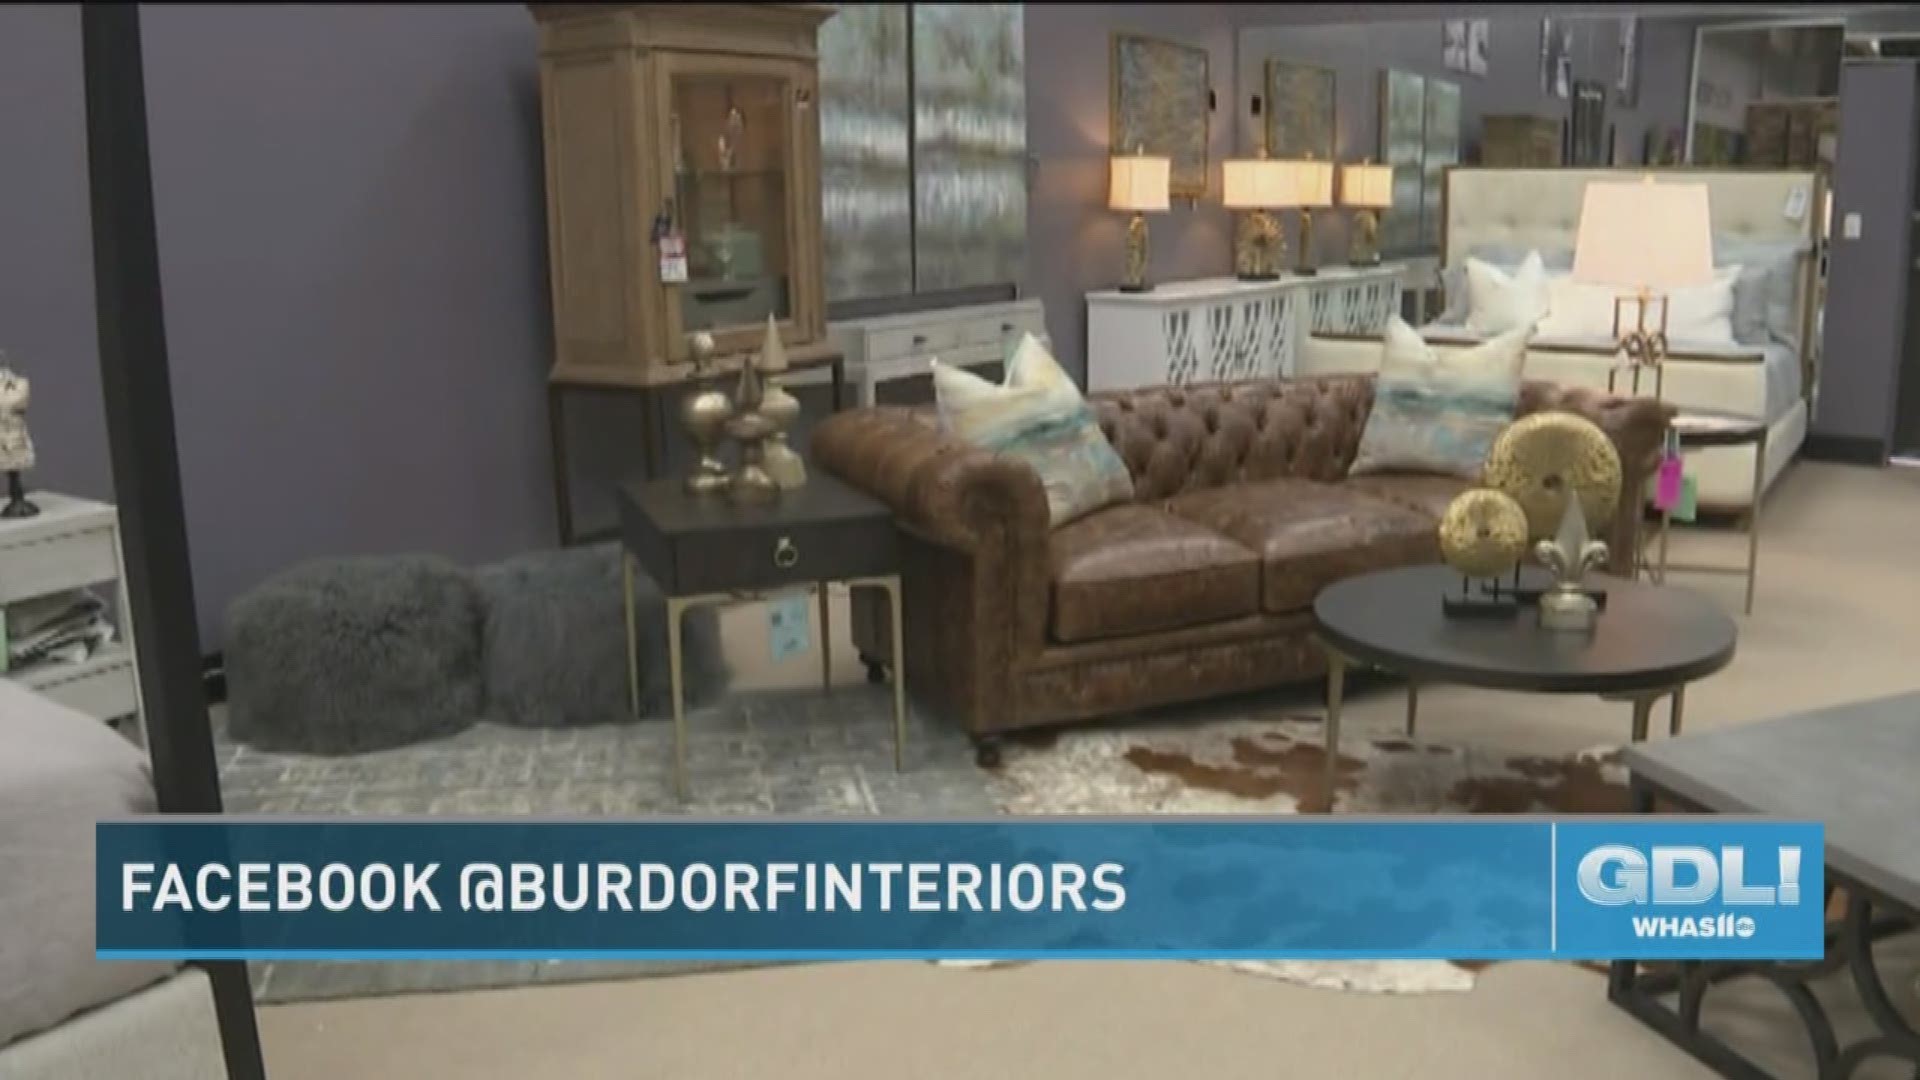 Burdorf Interiors is located at 401 North English Station Road in Louisville, KY. For more information, call 502-719-9700 or go to Burdorf.com.